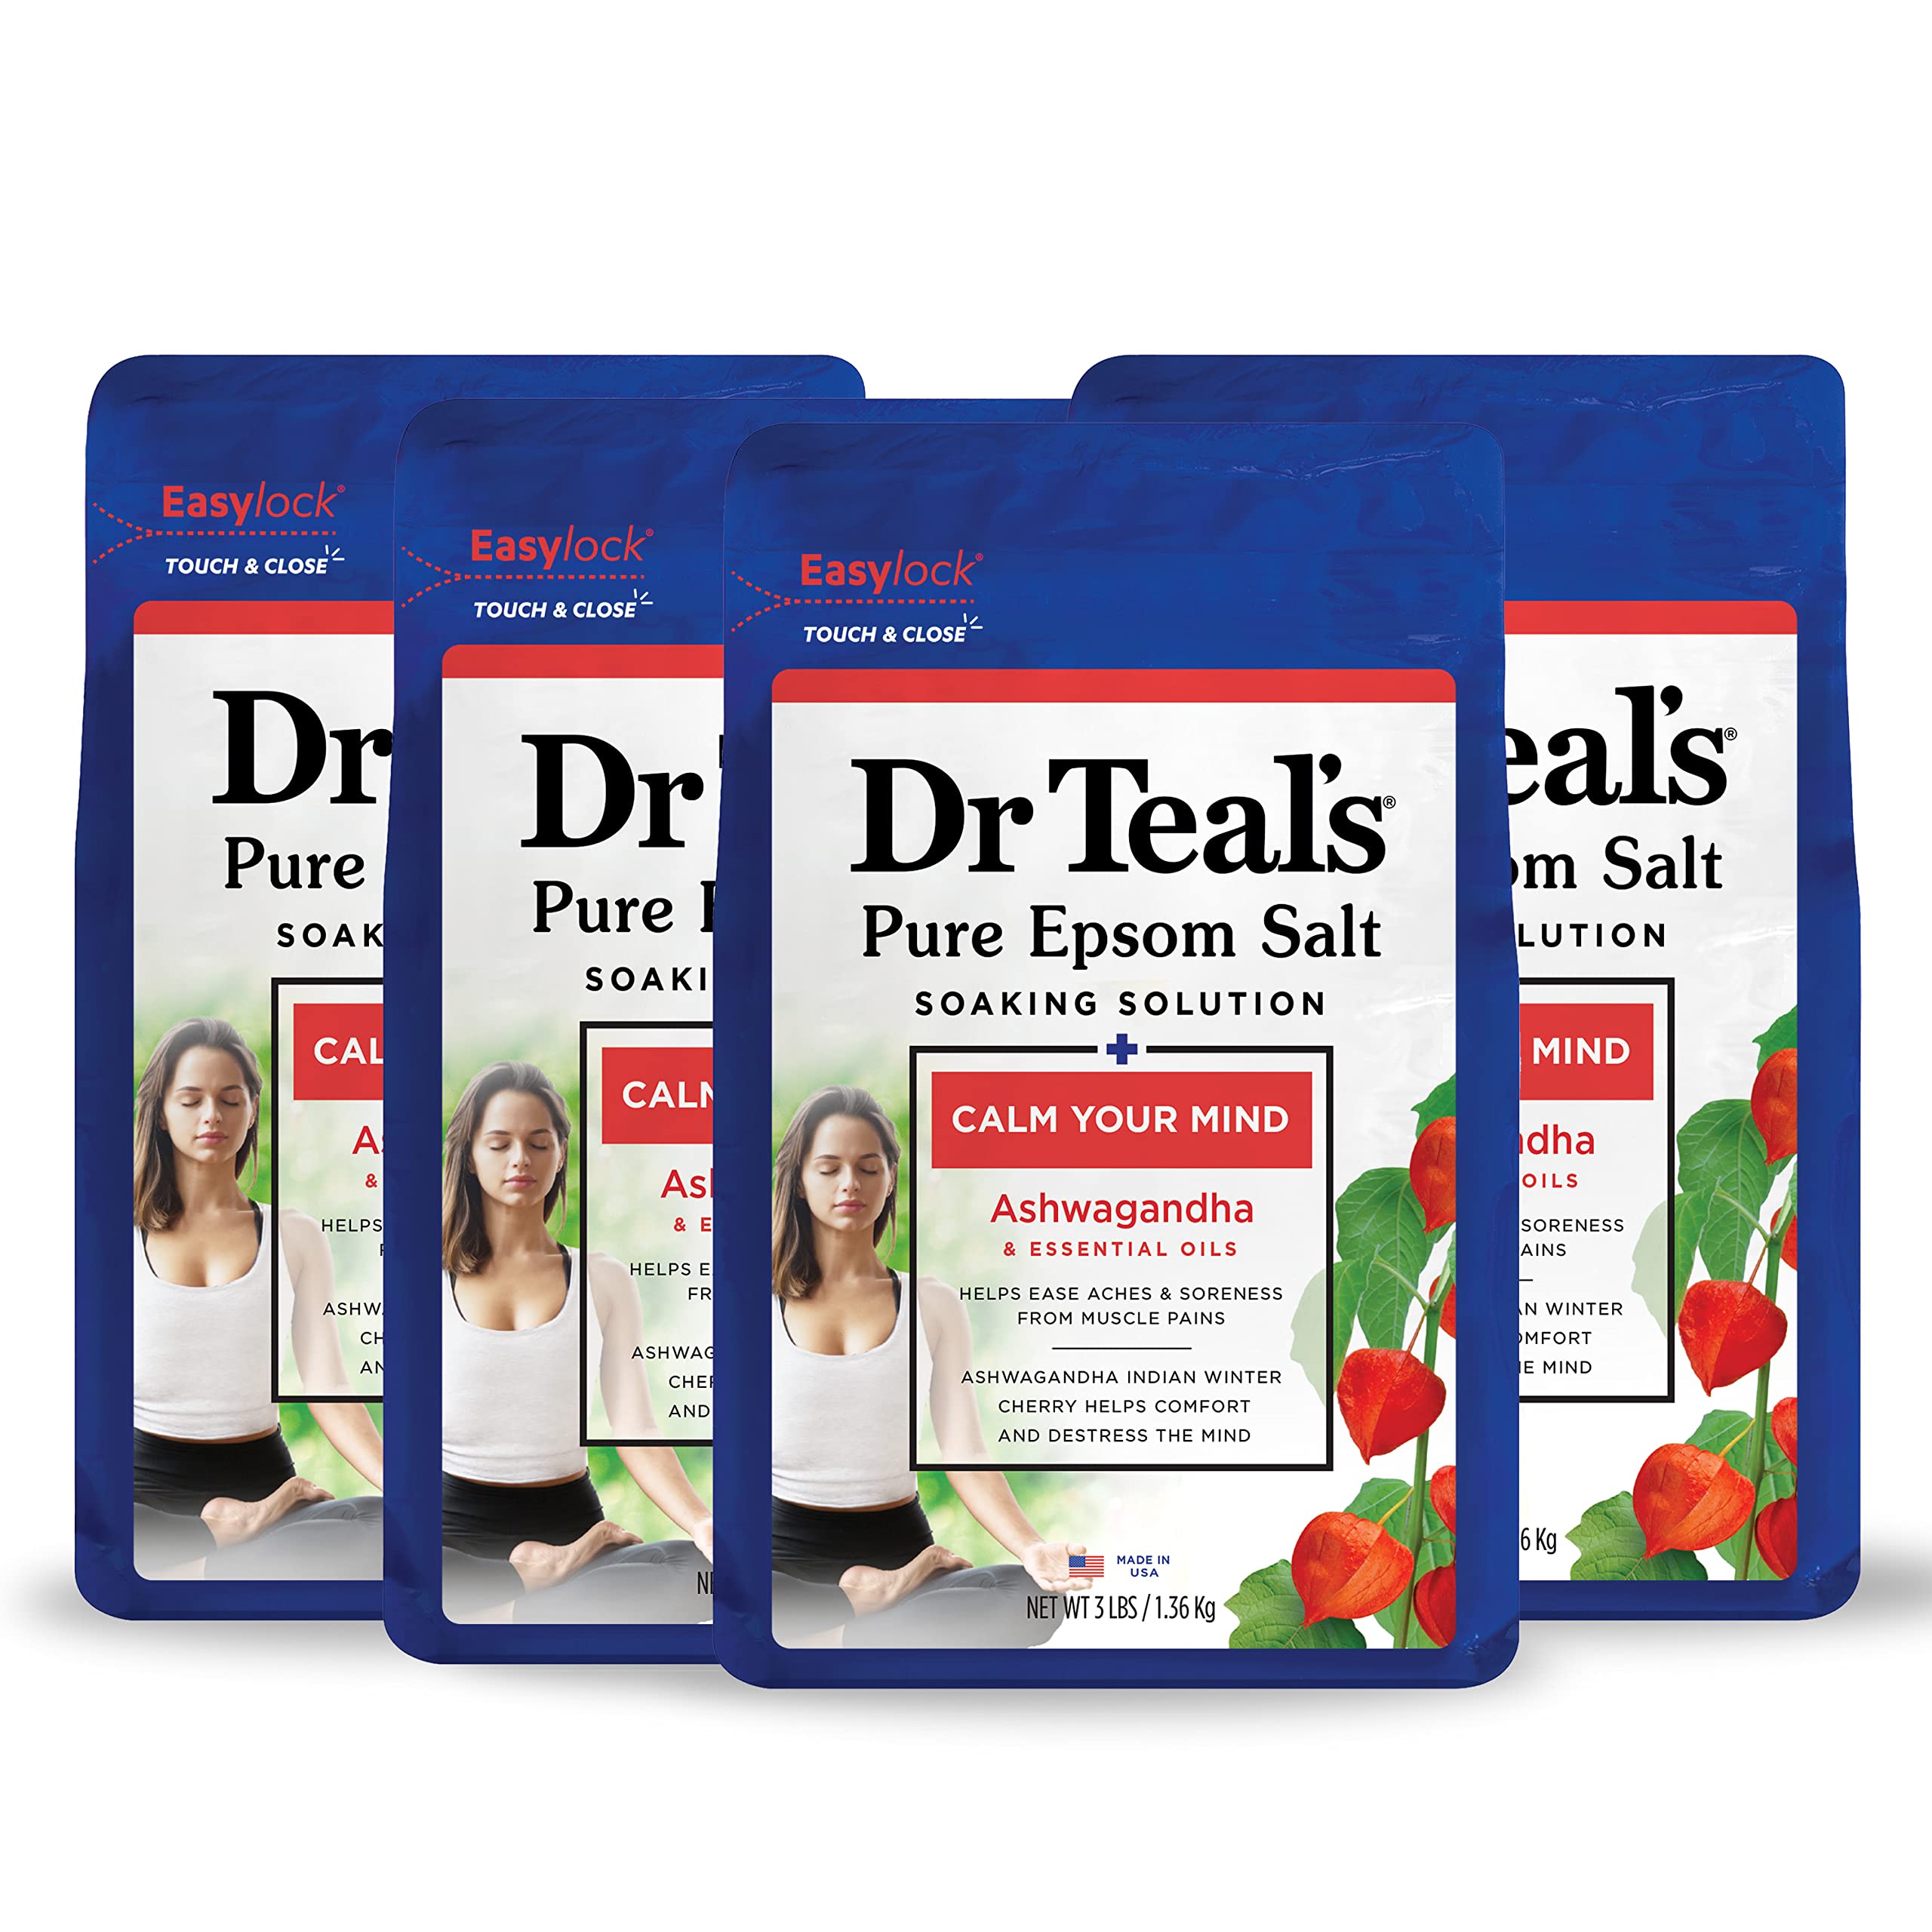 4-Pack 3lbs Dr Teal's Pure Epsom Salt, Ashwagandha & Essential Oils $9.50 w/ Subscribe & Save